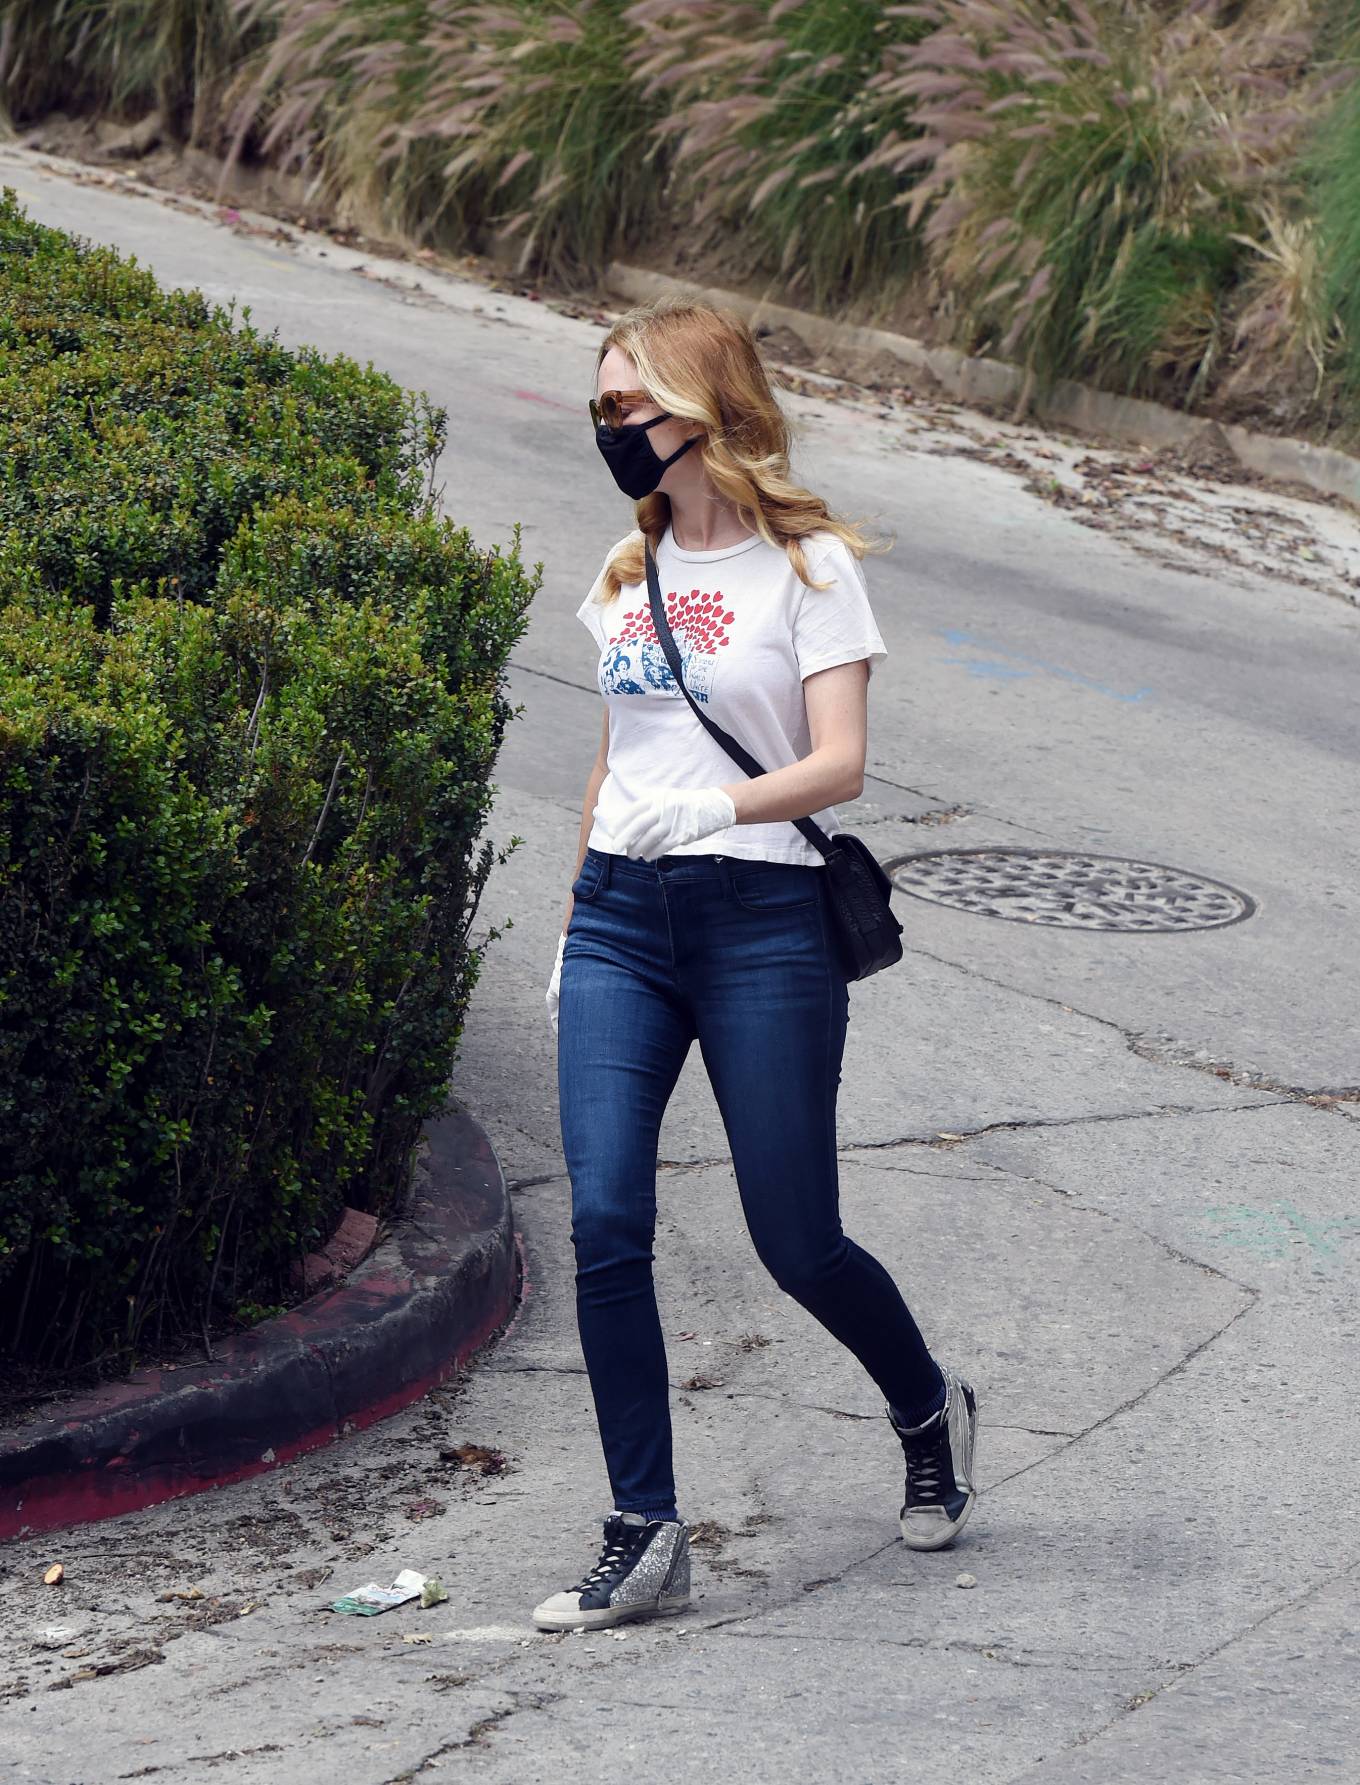 Heather Graham 2020 : Heather Graham in Jeans – Out in Los Angeles-05